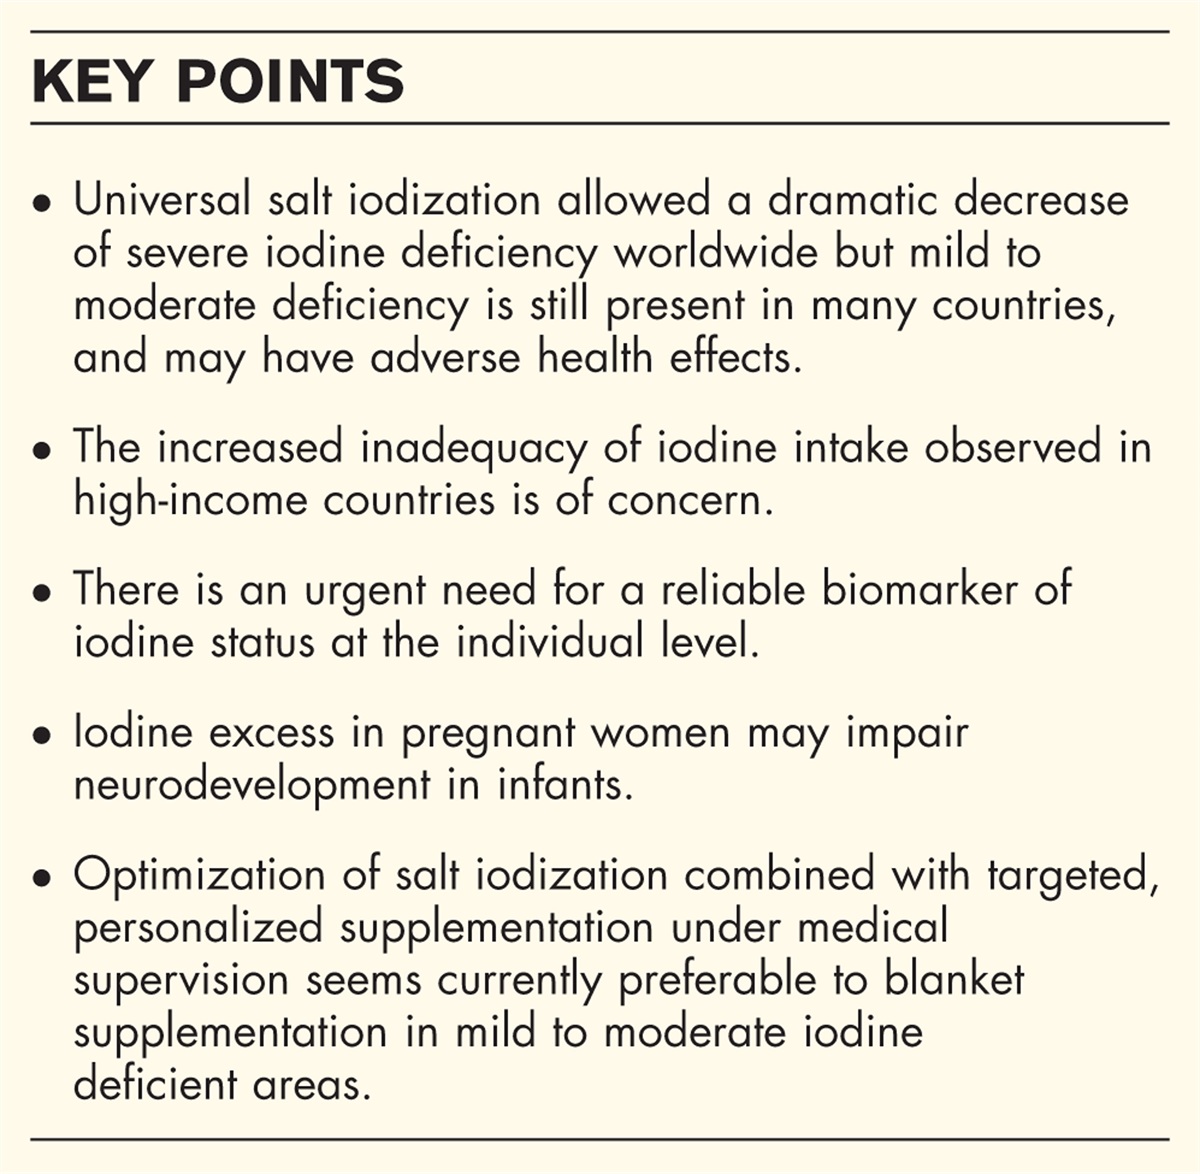 Impact of iodine supply in infancy and childhood